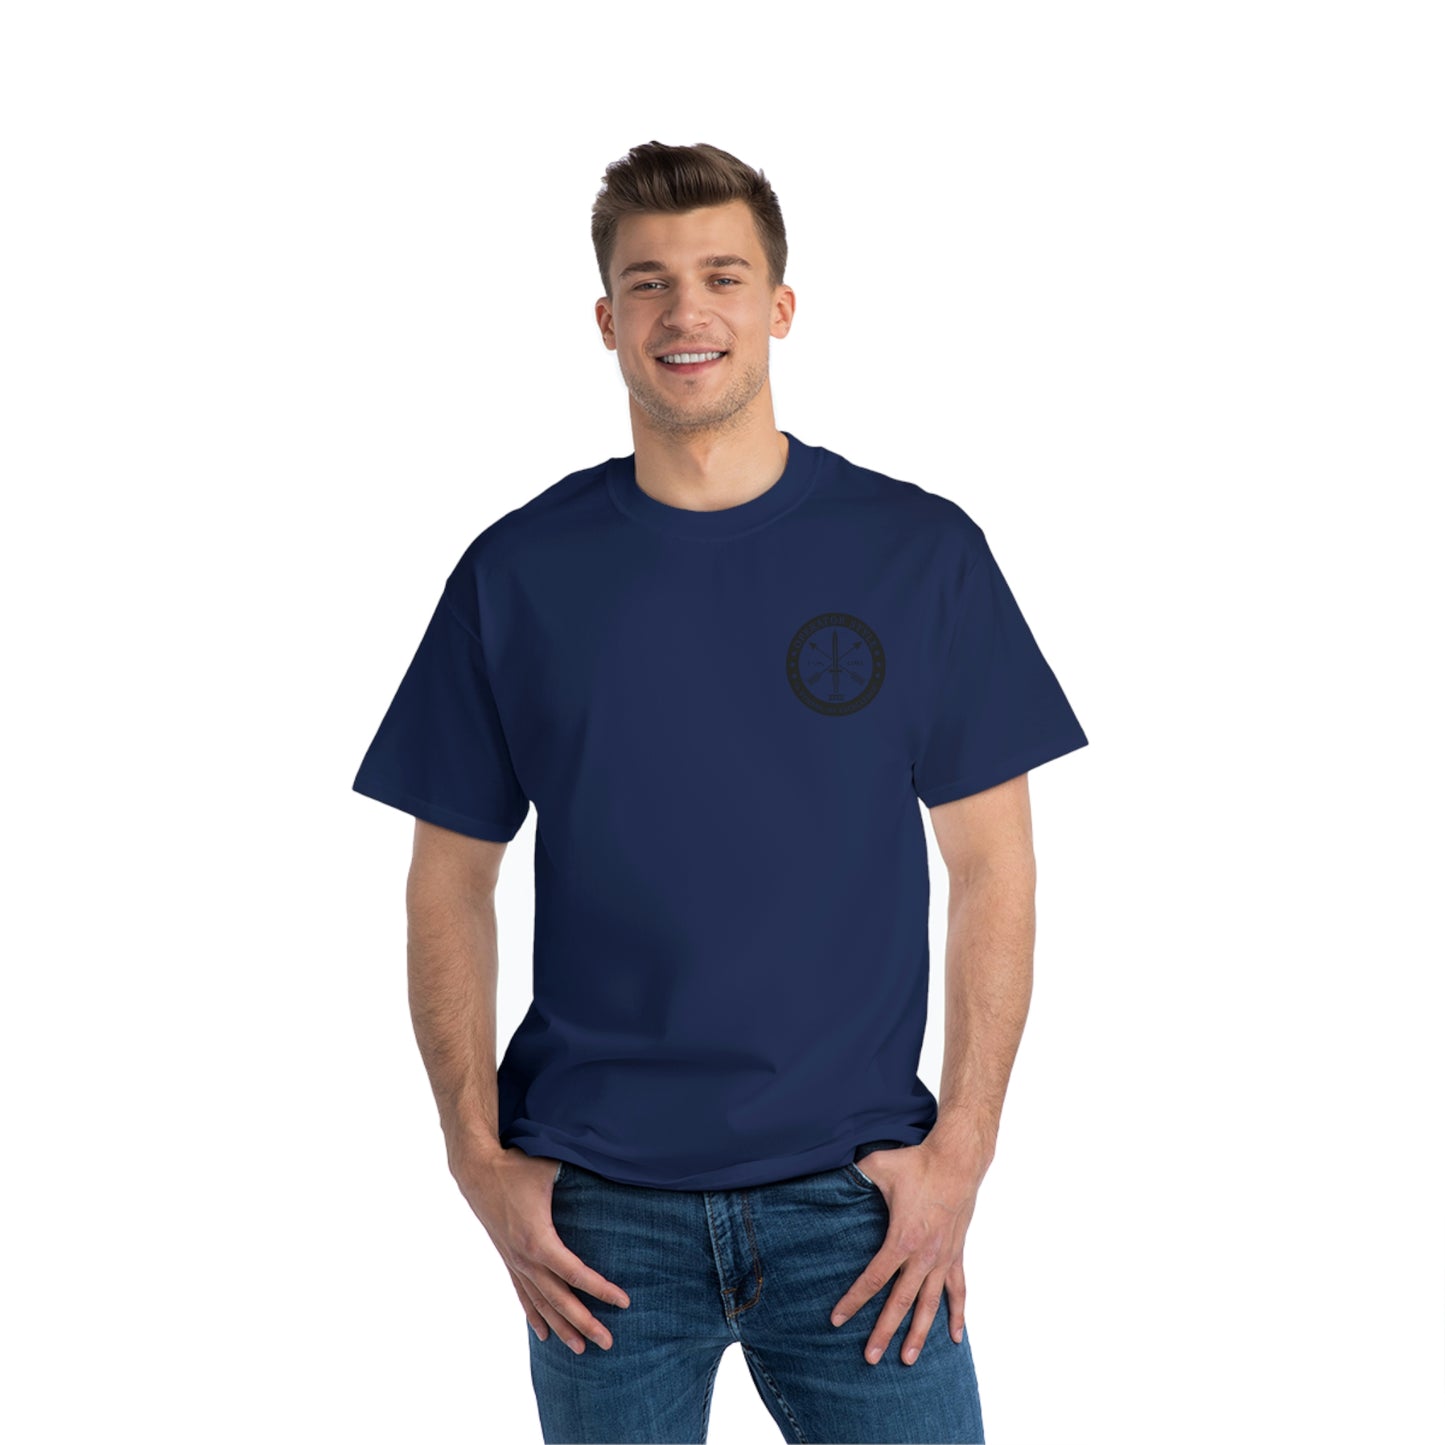 Operator Style/DCC Hanes 100% Cotton Beefy-T®  Short-Sleeve T-Shirt